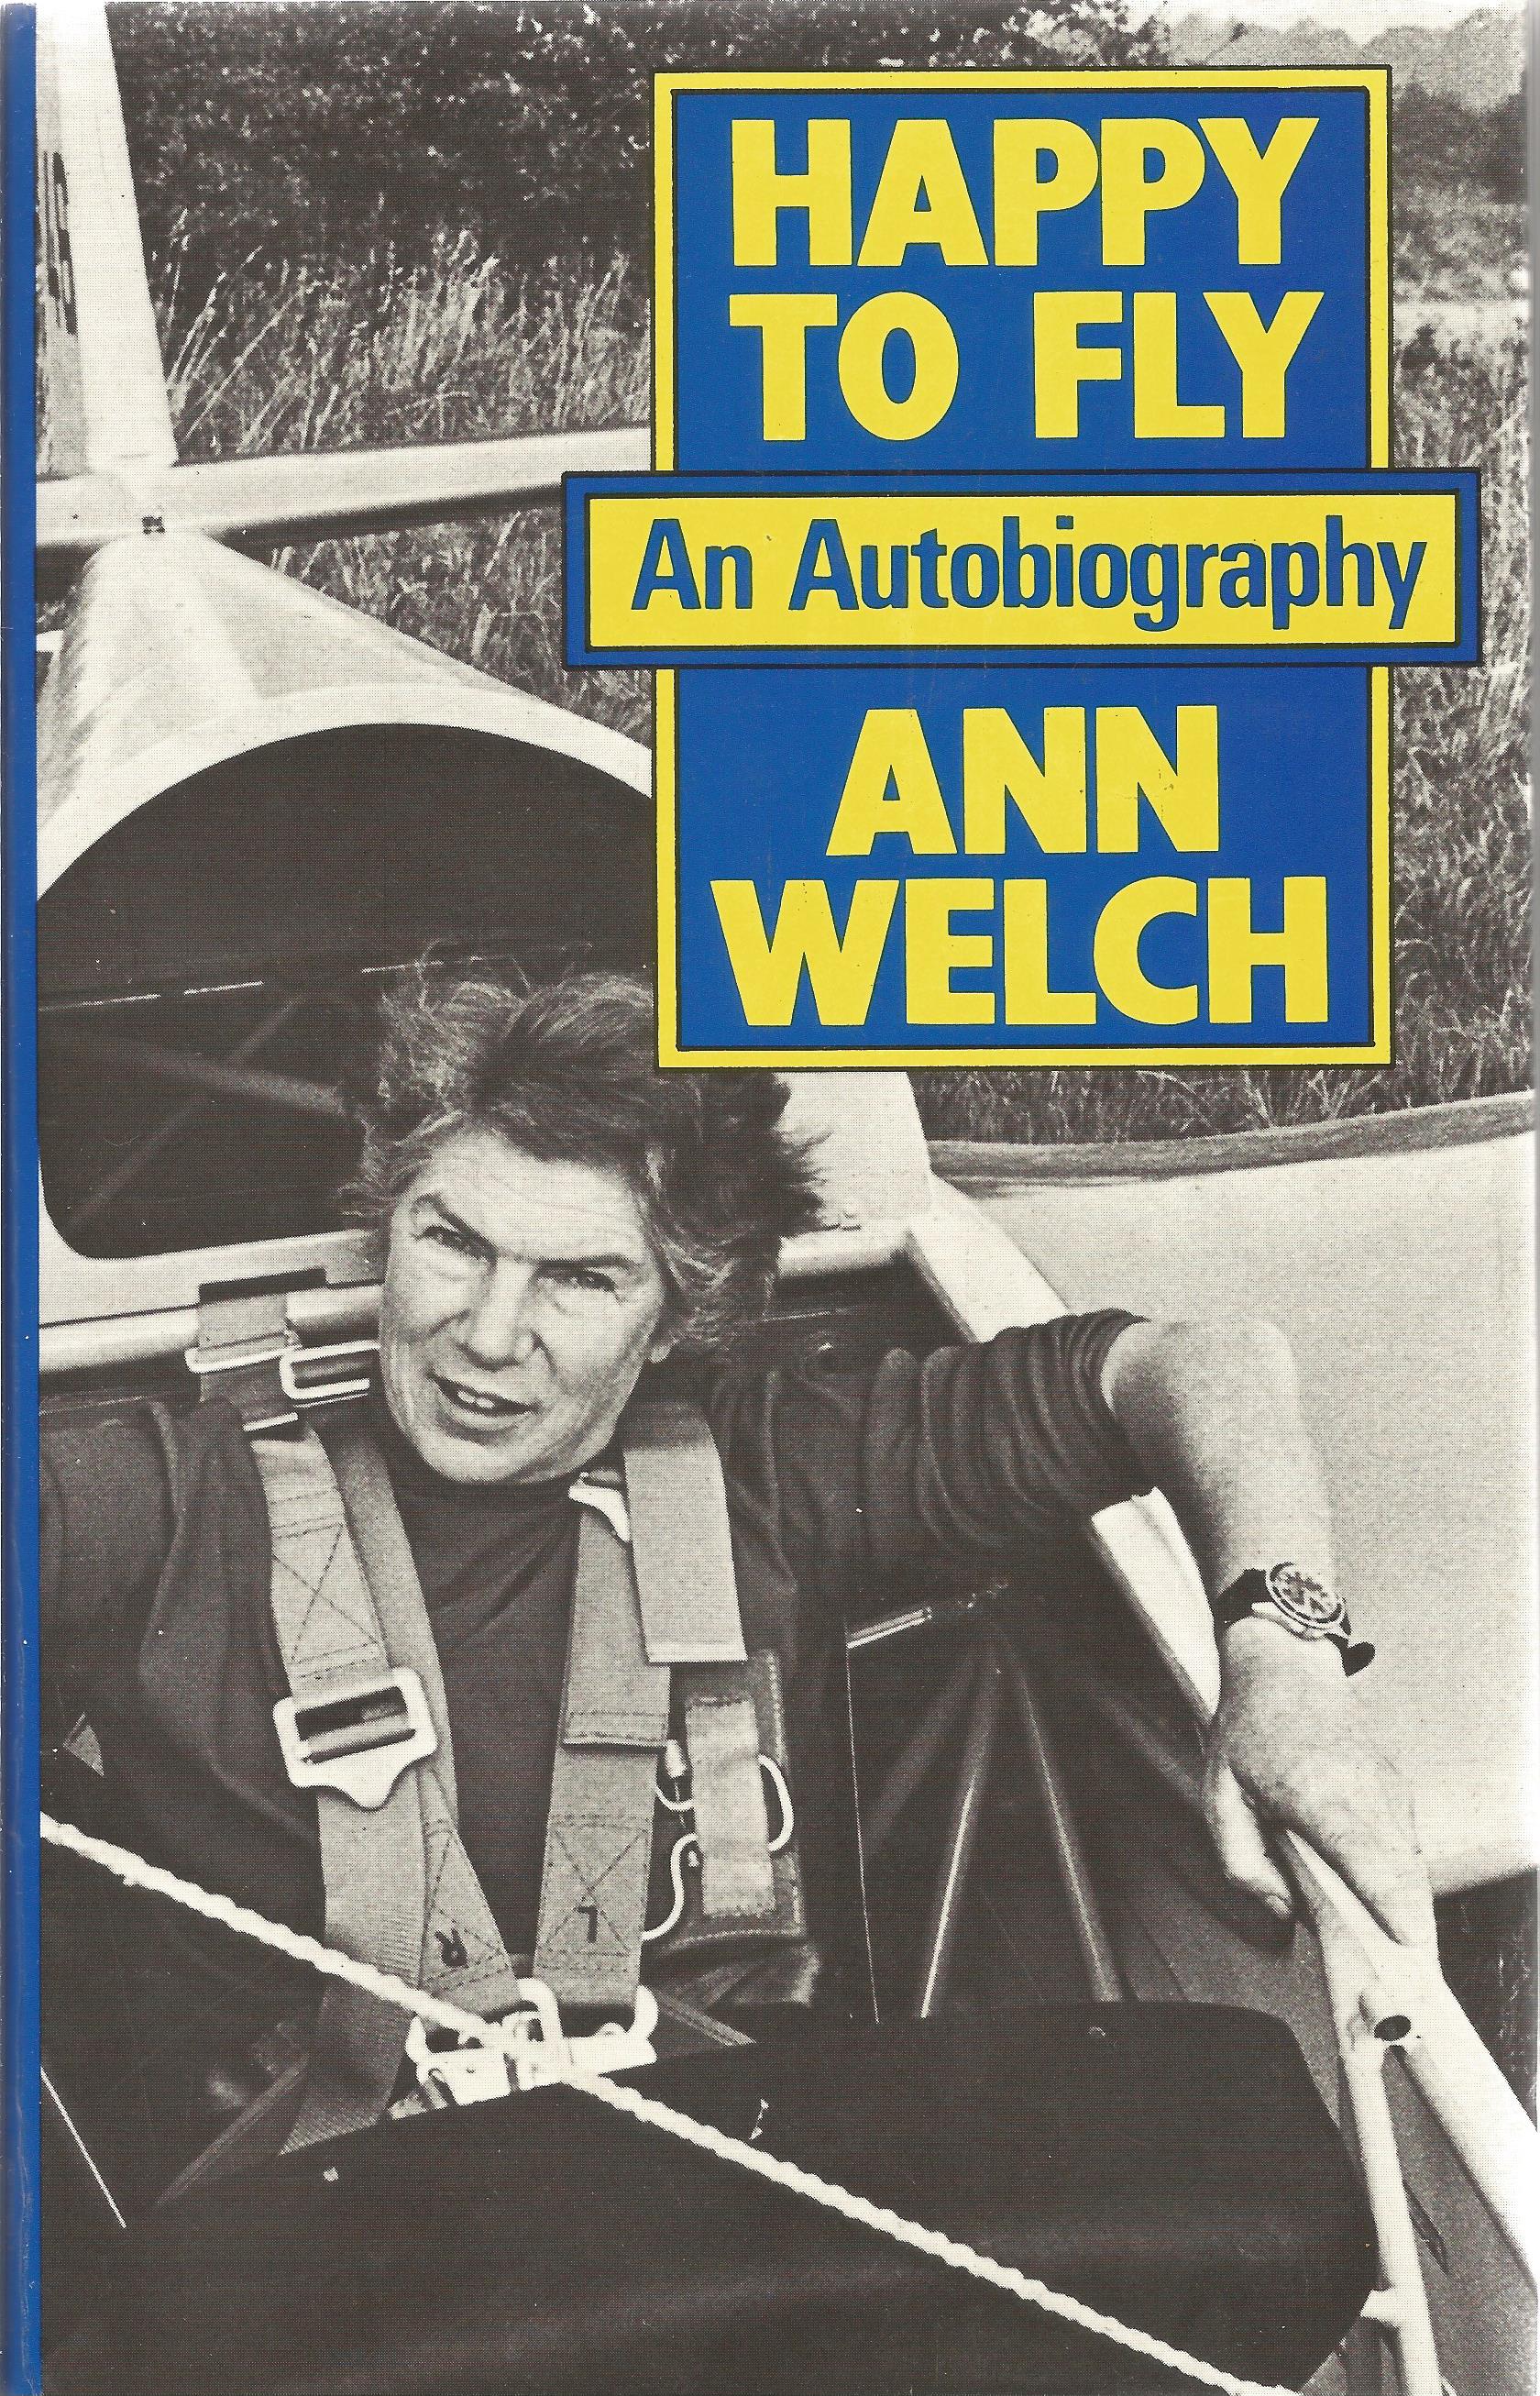 Ann Welch Hardback Book Happy to Fly - An Autobiography signed by the Author on the Title Page First